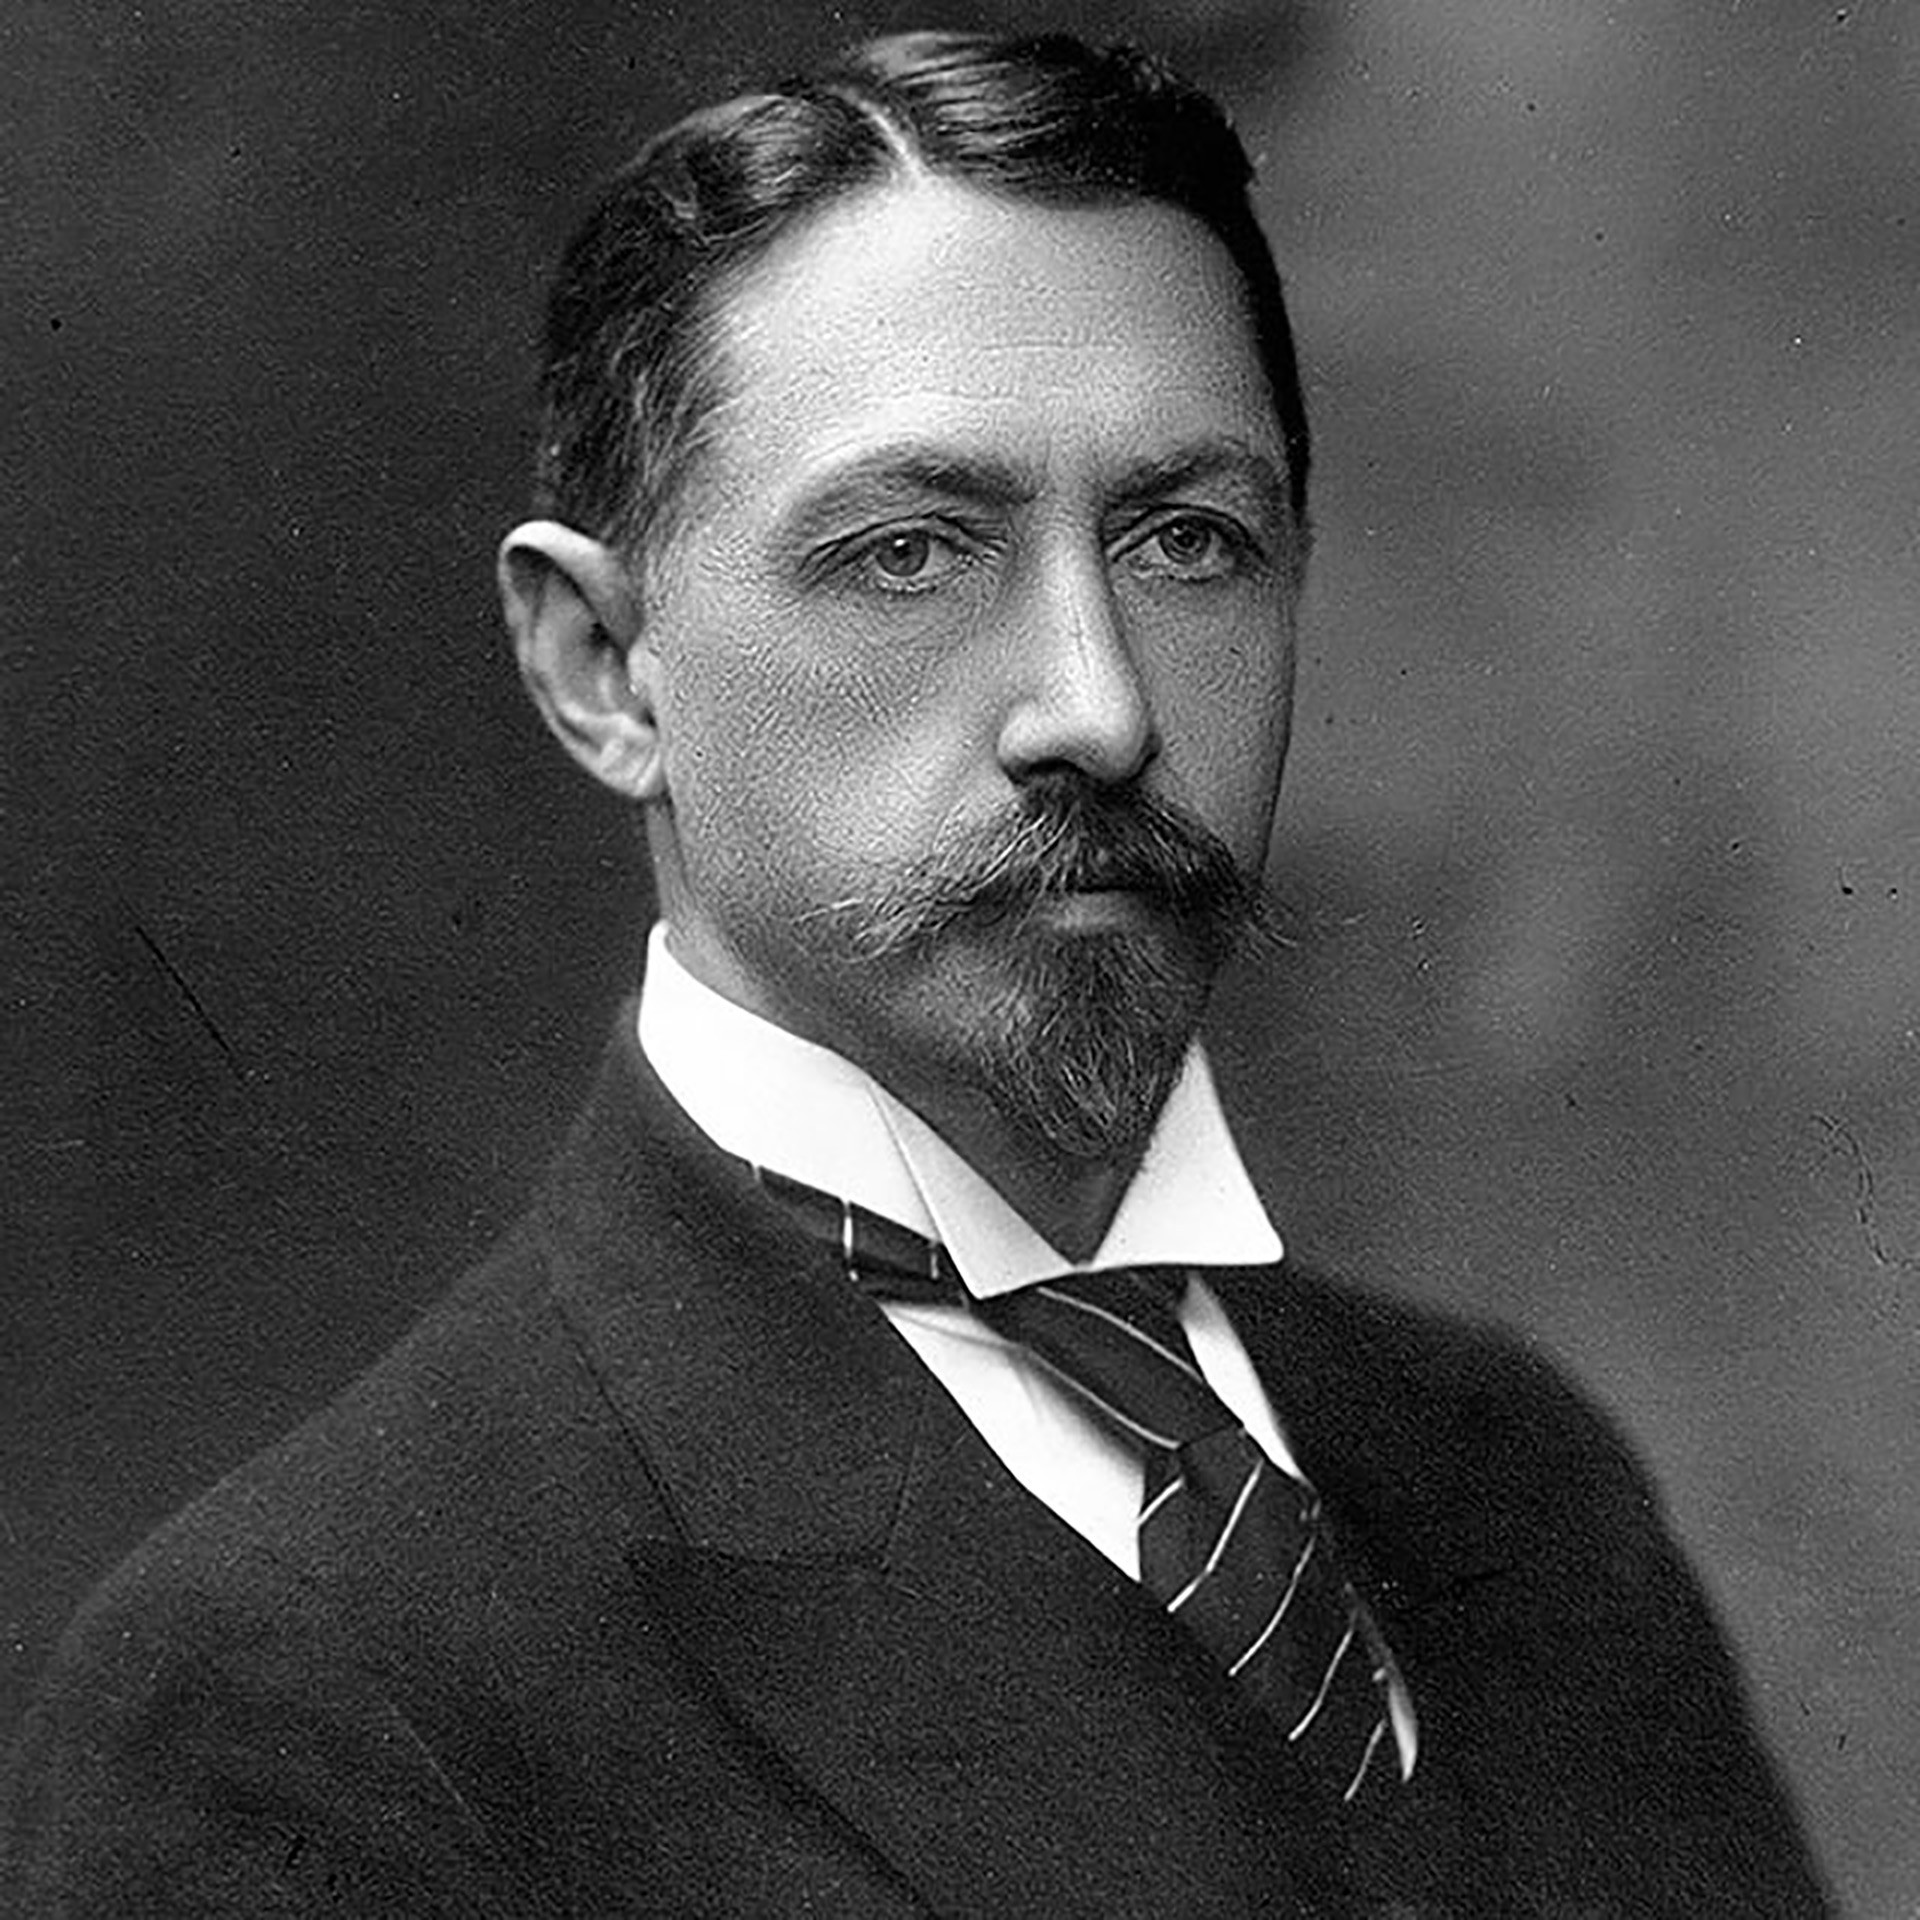 Ivan Bunin, a Nobel prize winner from Russia, who hated the Bolshevism and was longing for old Russia until the end of his life.